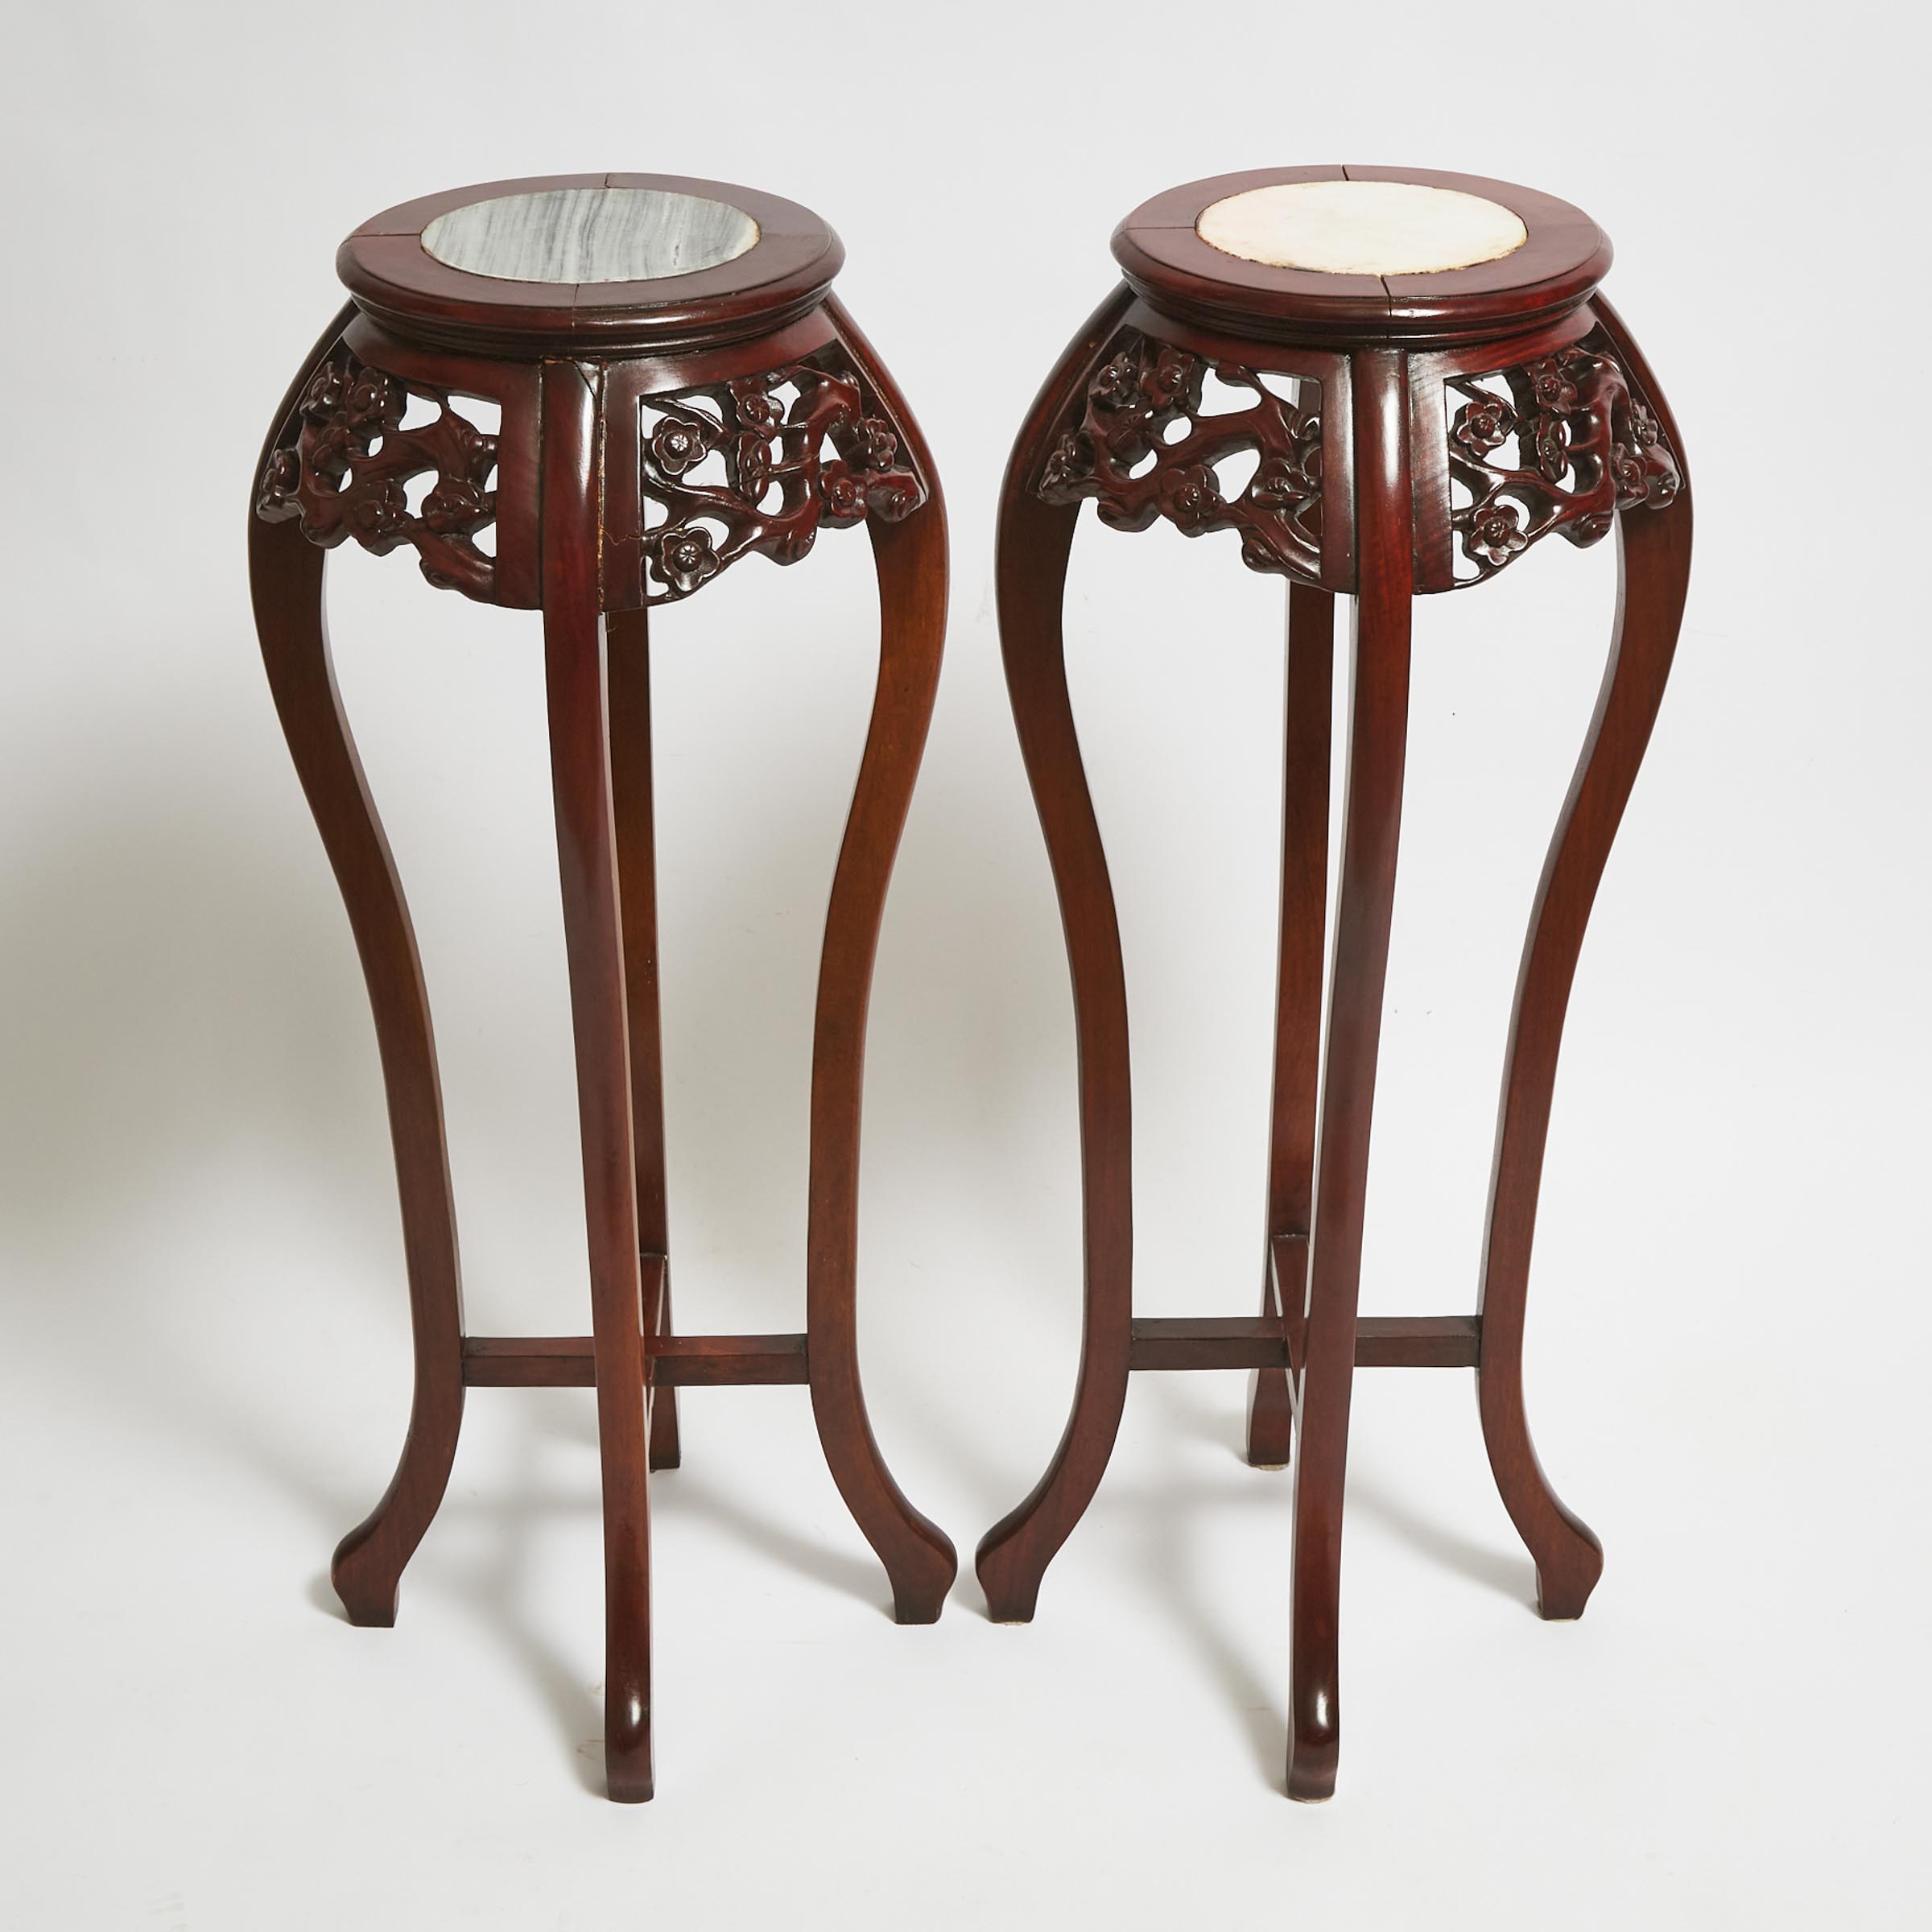 A Pair of Chinese Marble-Inset Wood Stands, Mid 20th Century